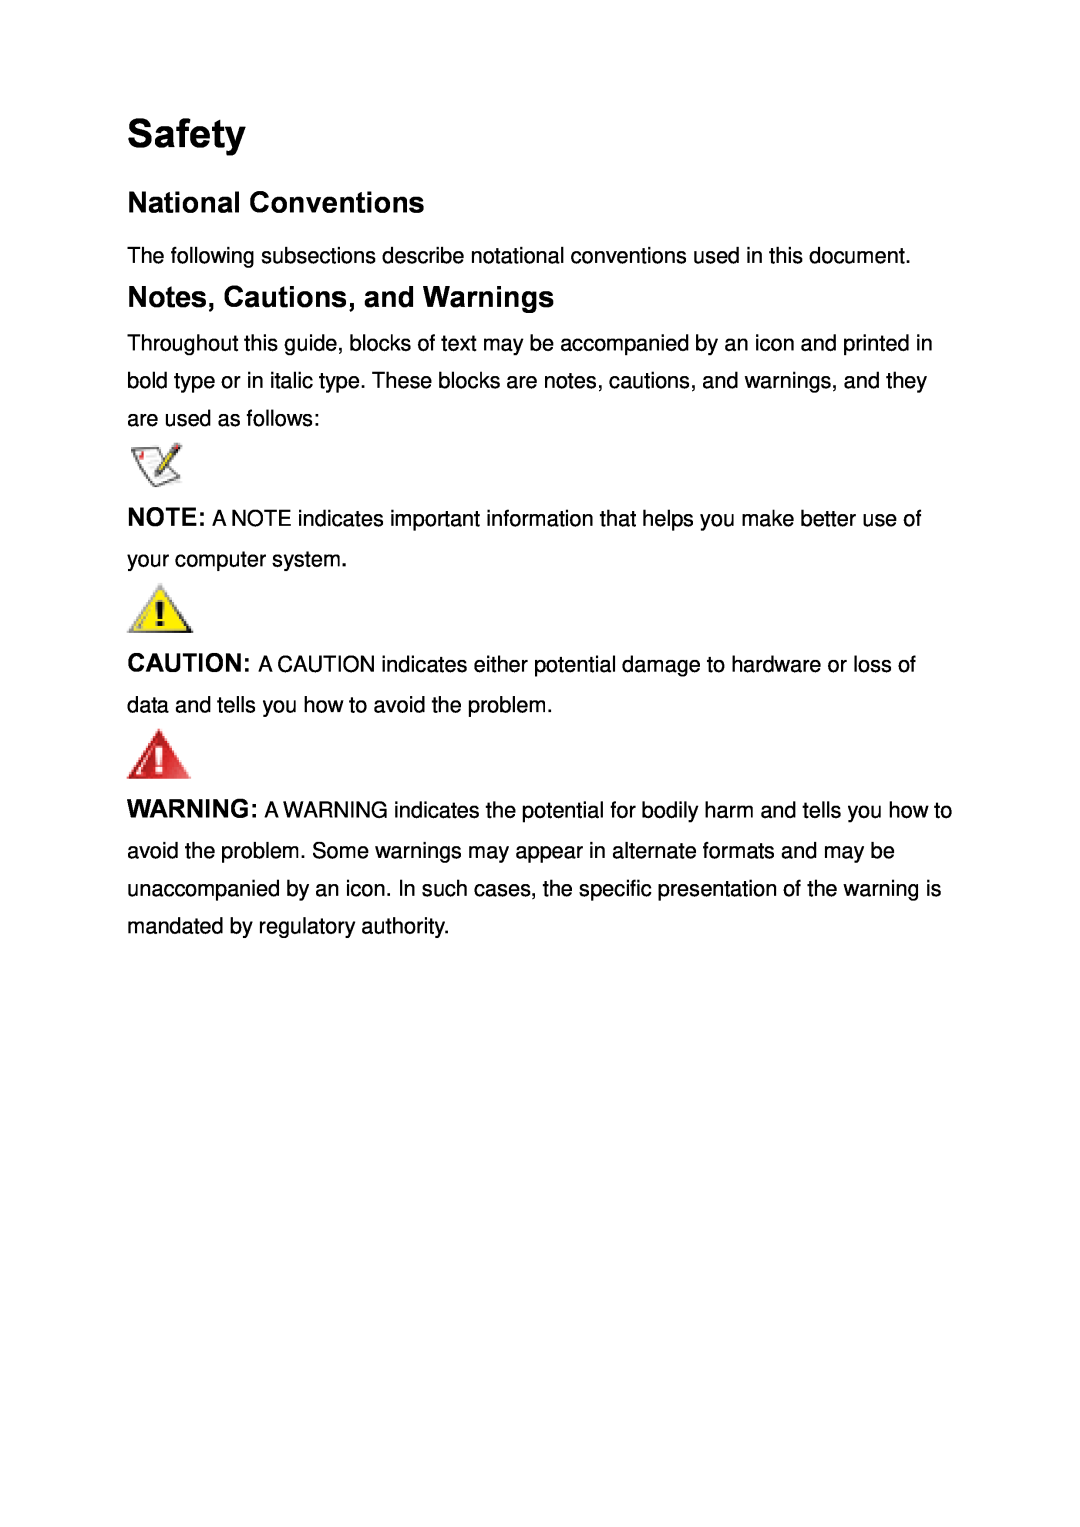 AOC E2251FWU user manual Safety, National Conventions, Notes, Cautions, and Warnings 